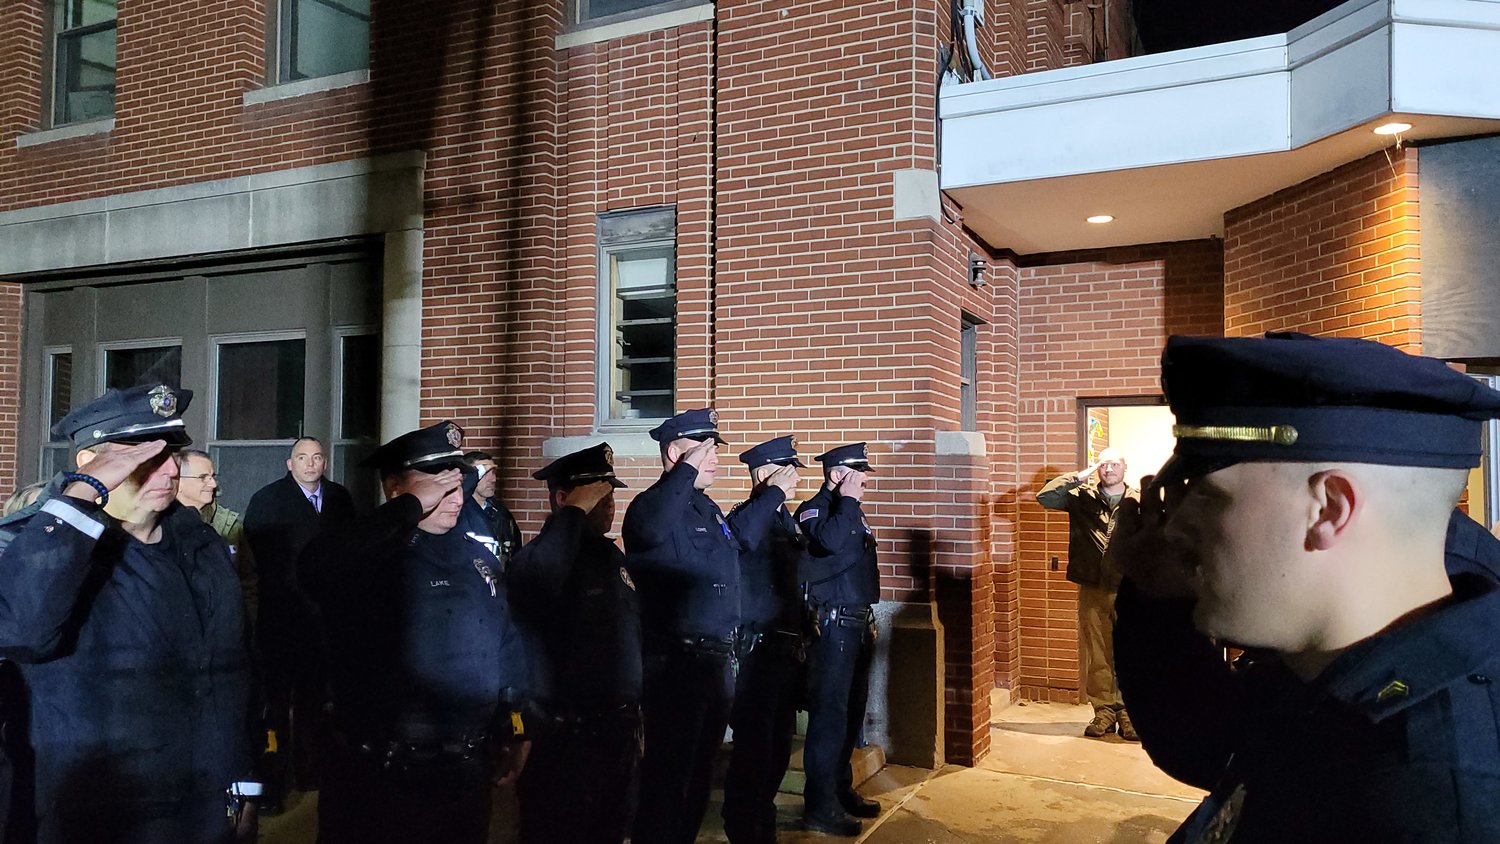 Last night Detective Hess took his final walk out of the Liberty Police Department. He was surrounded by friends and family and saluted by the entire department as he left.